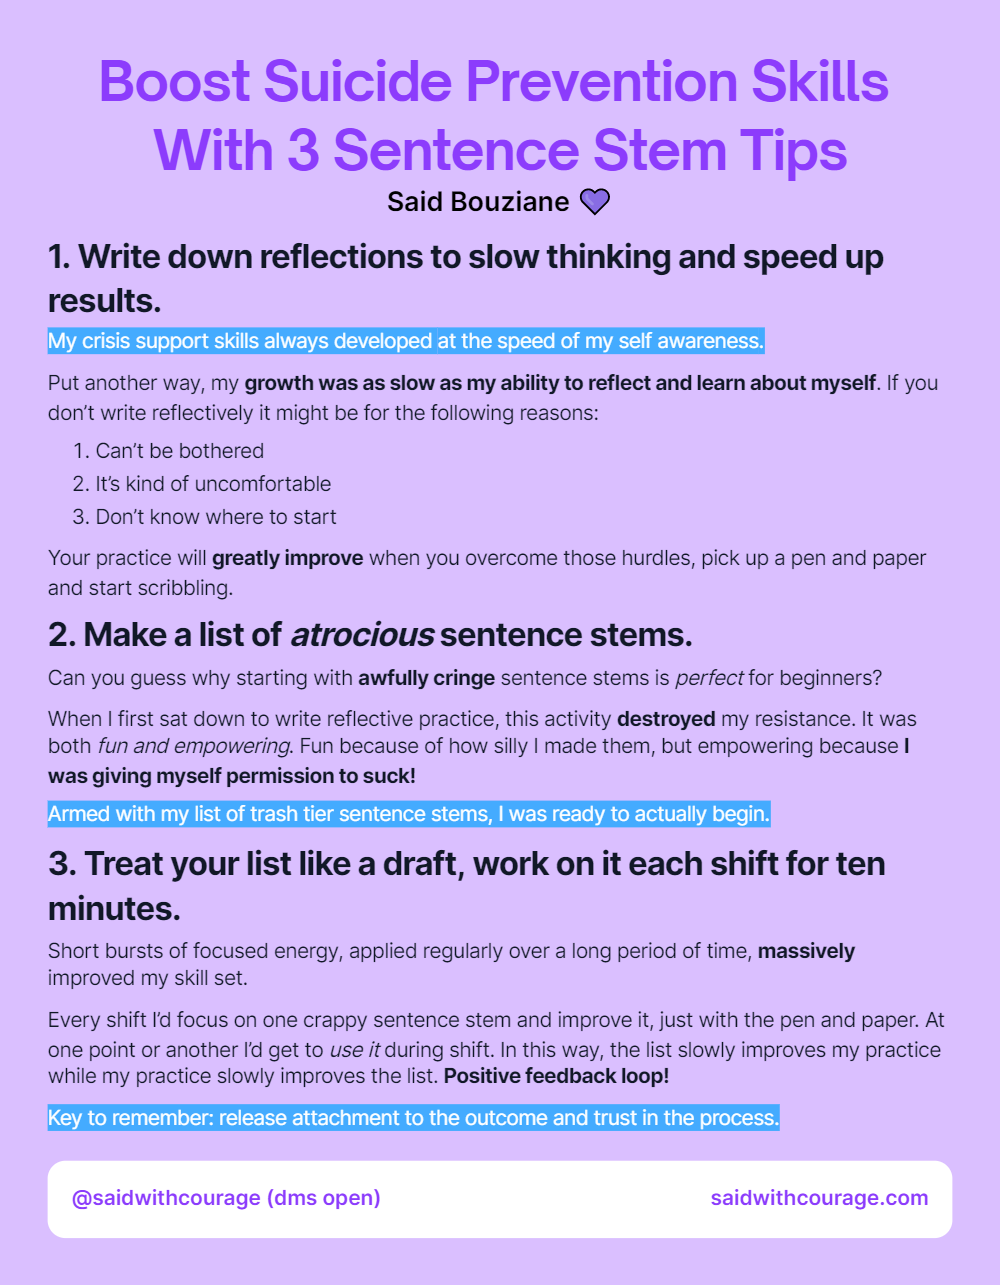 Boost Suicide Prevention Skills With 3 Sentence Stem Tips